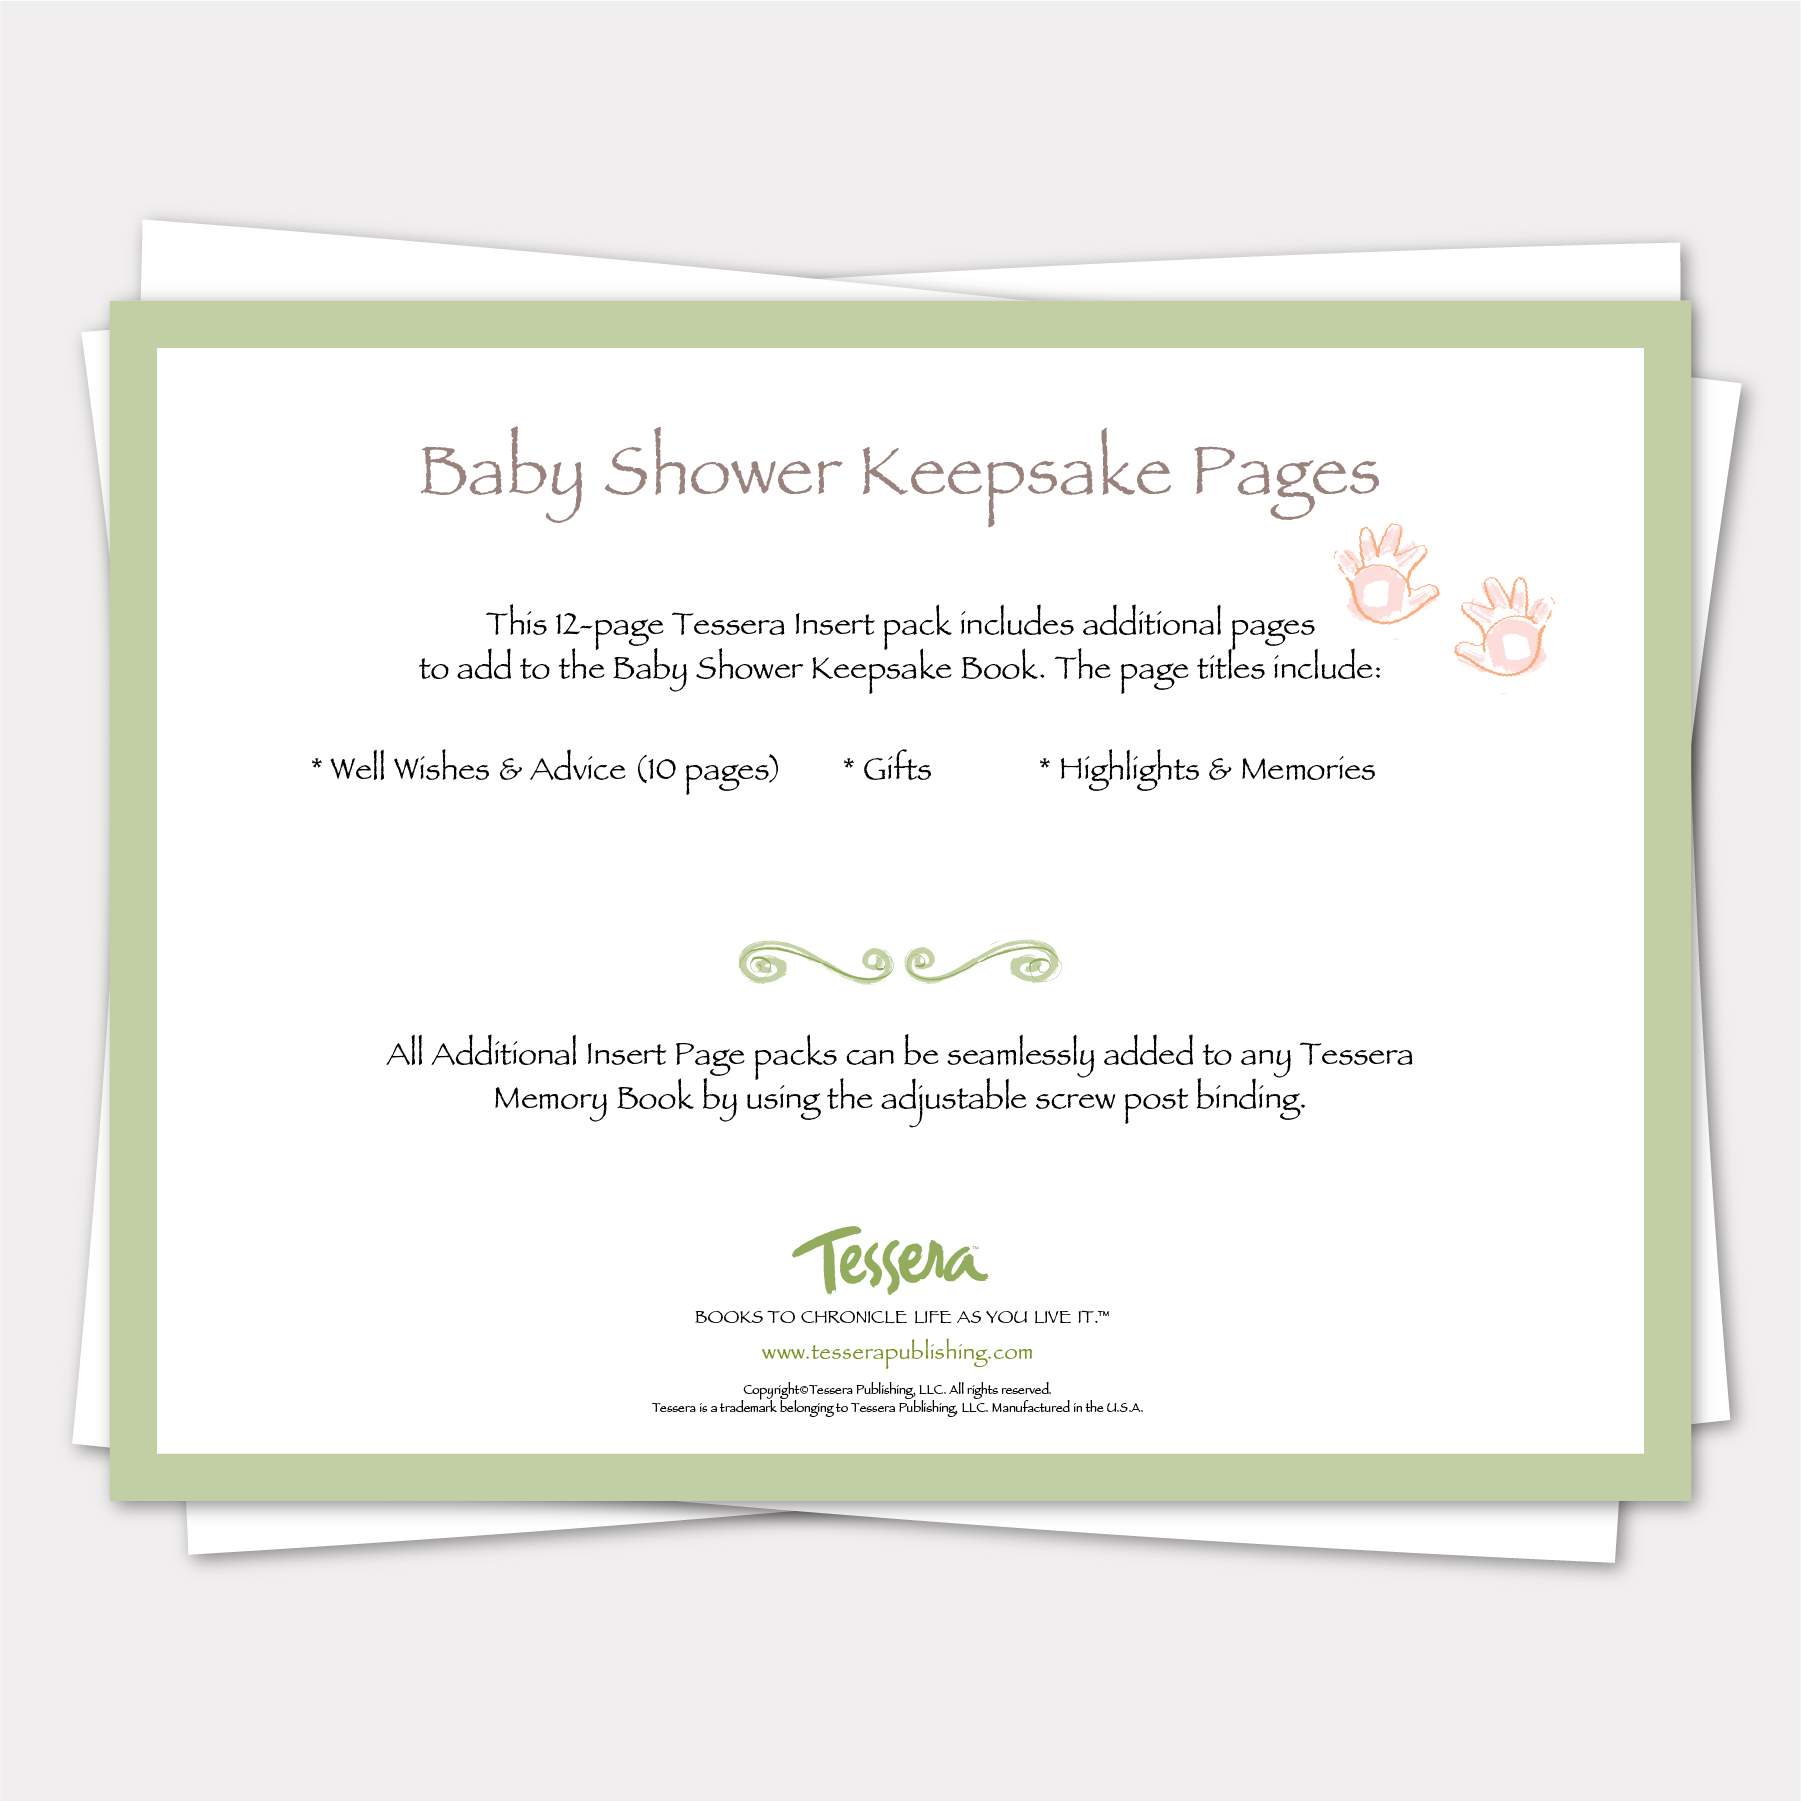 baby shower keepsake pages for tessera memory books